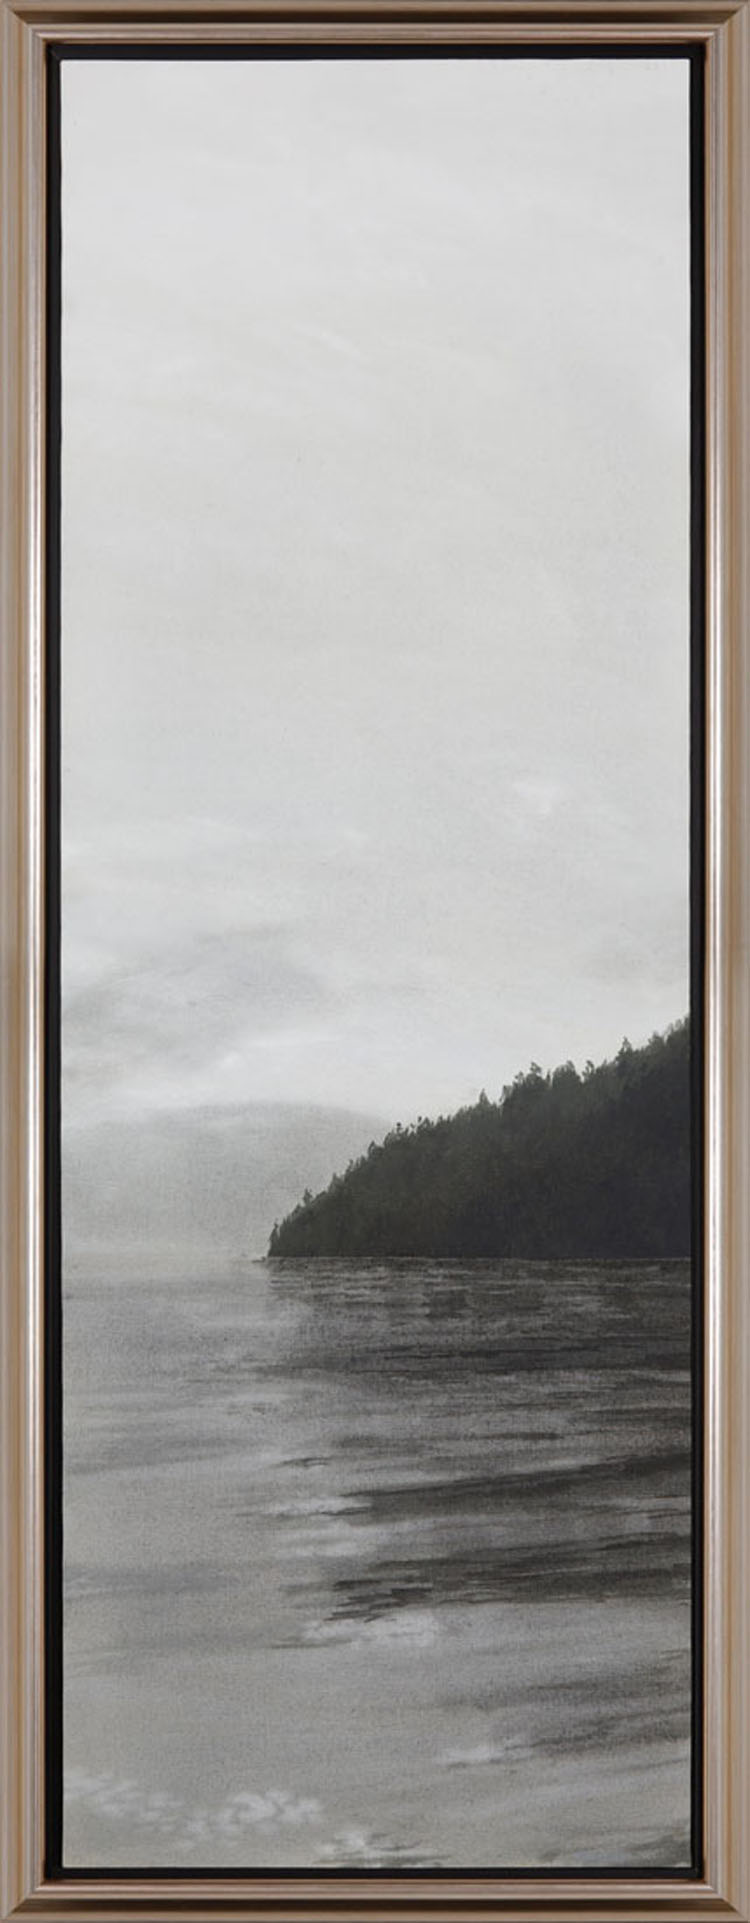 Inside Passage 7/91, Tolmie Channel by Takao Tanabe